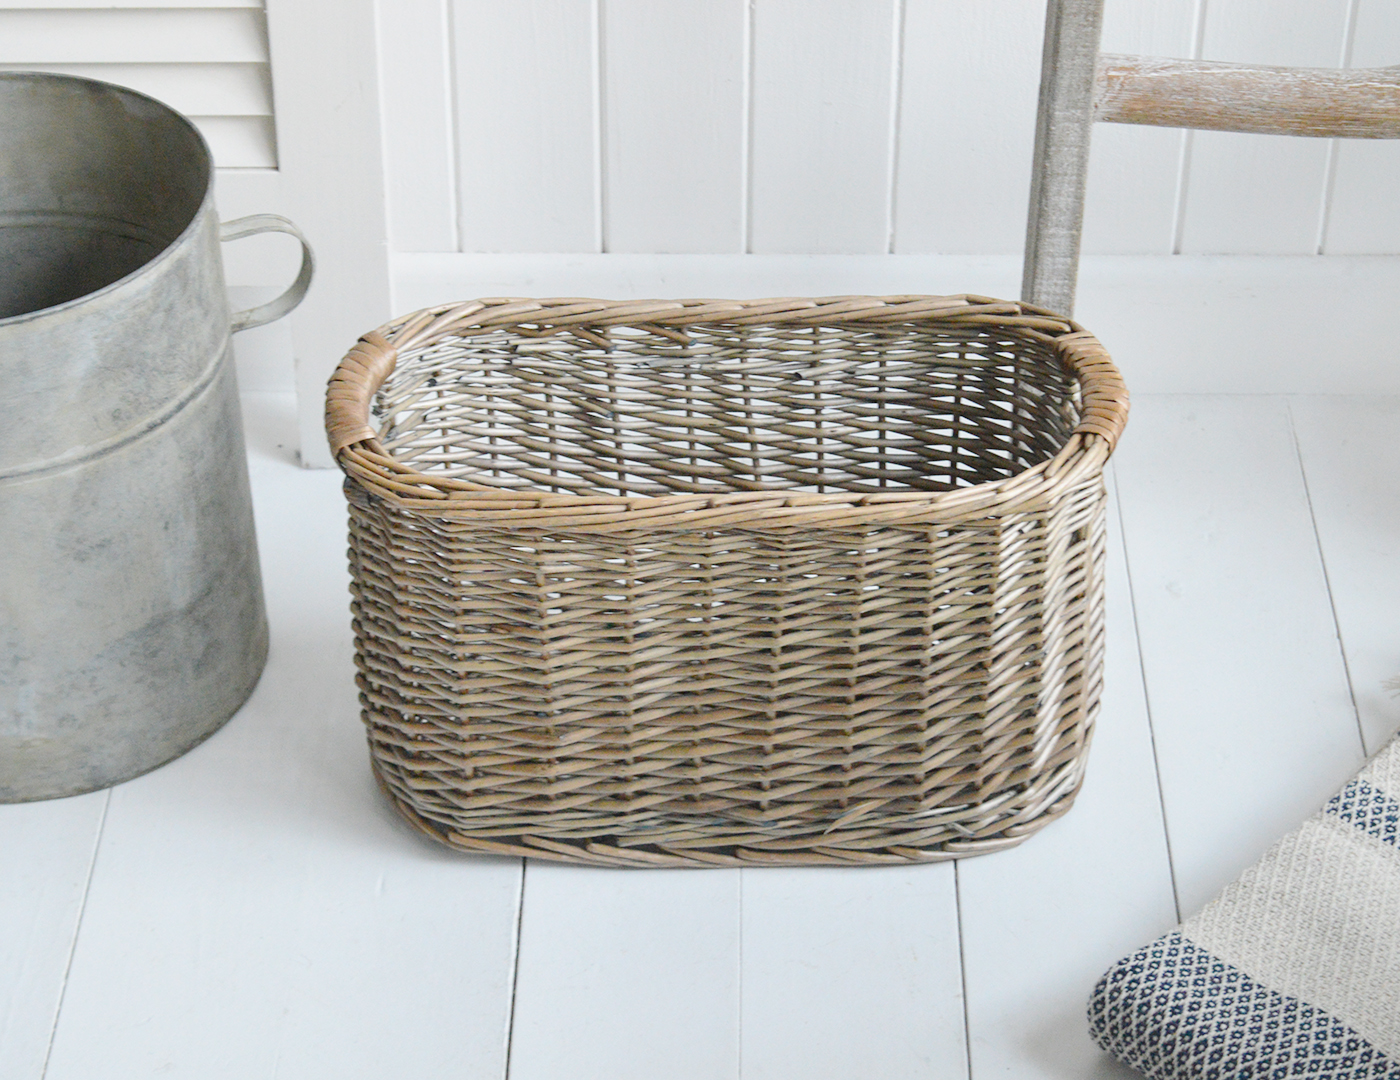 Harrow oval slim basket. Ideal Toilet roll storage or for throws beside the sofa from The White Lighthouse Furniture. New England, country, coastal, farmhouse city and whie home interiors. Hallway, Bedroom , Bathroom and living room